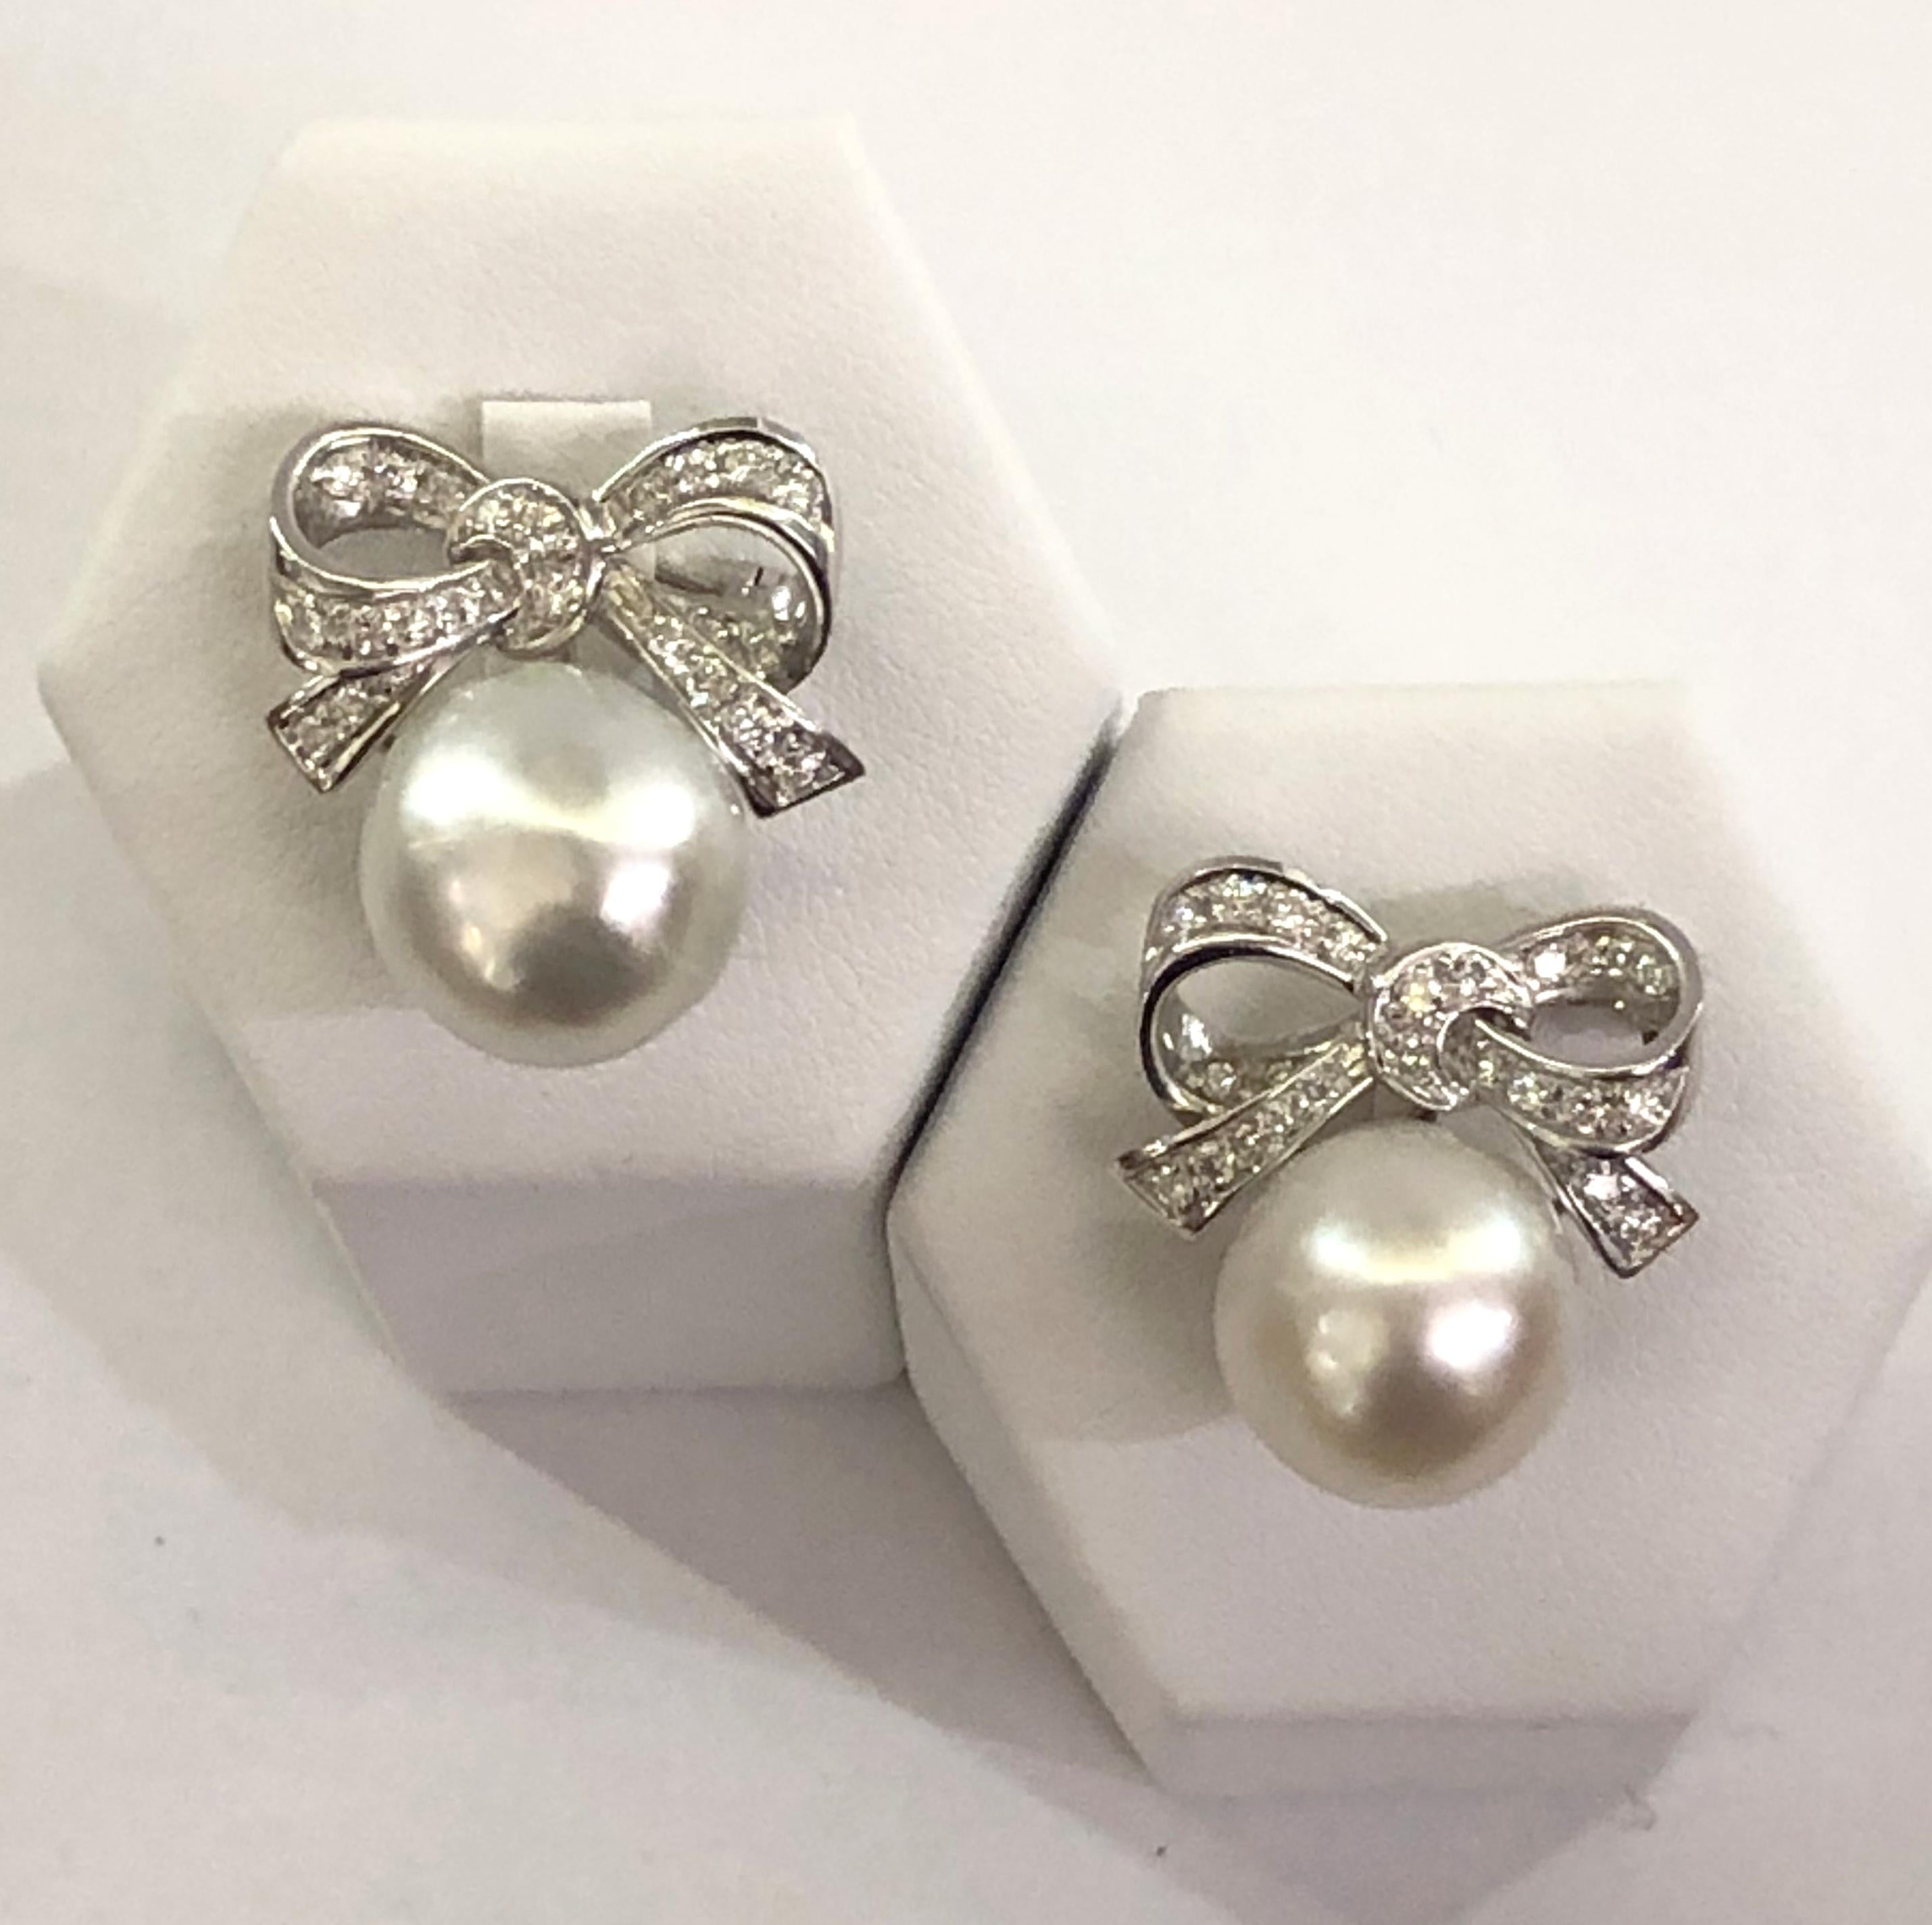 Pair of vintage love bow earrings with 18 karat white gold, Australian pearls and brilliant diamonds, Italy 1970s